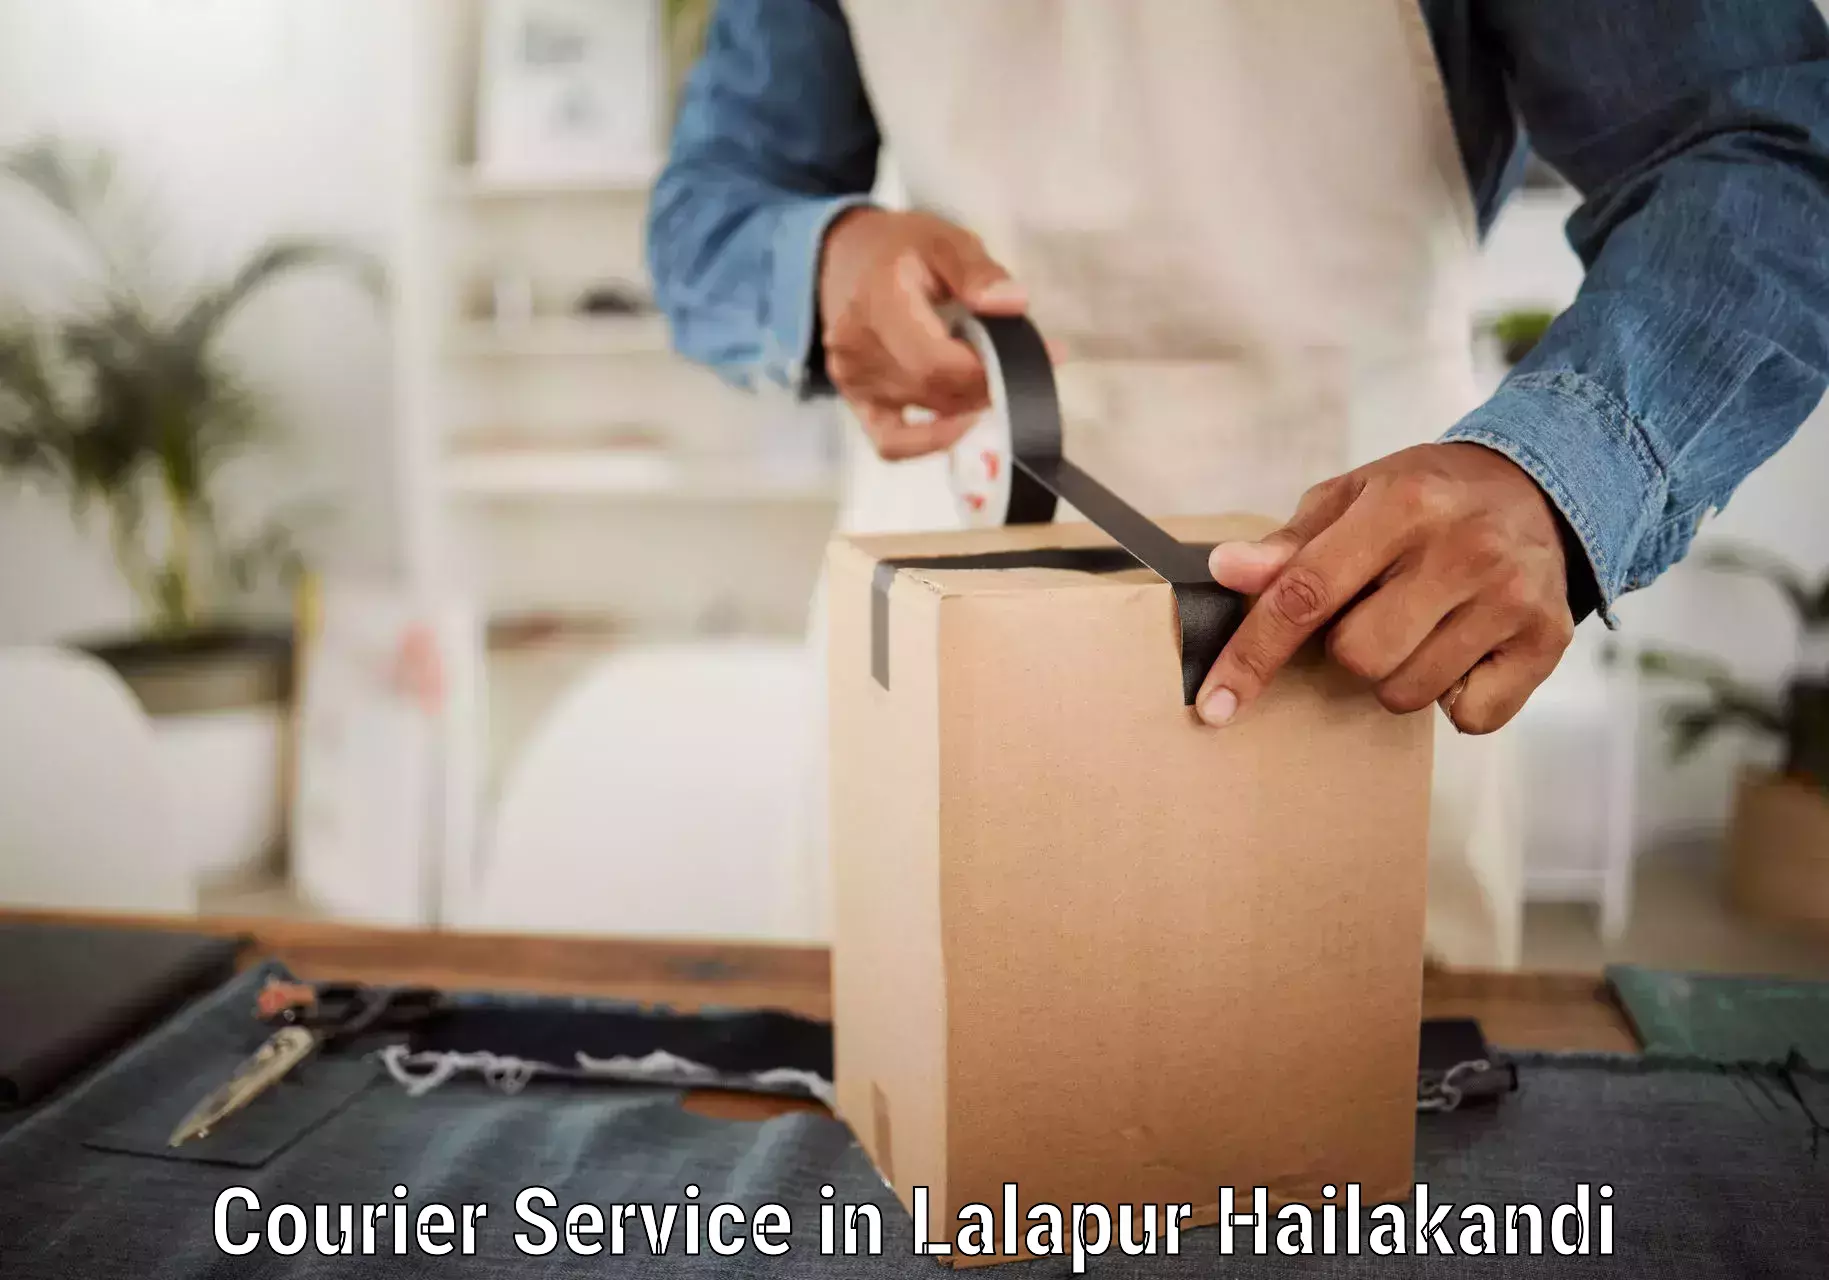 Parcel delivery in Lalapur Hailakandi